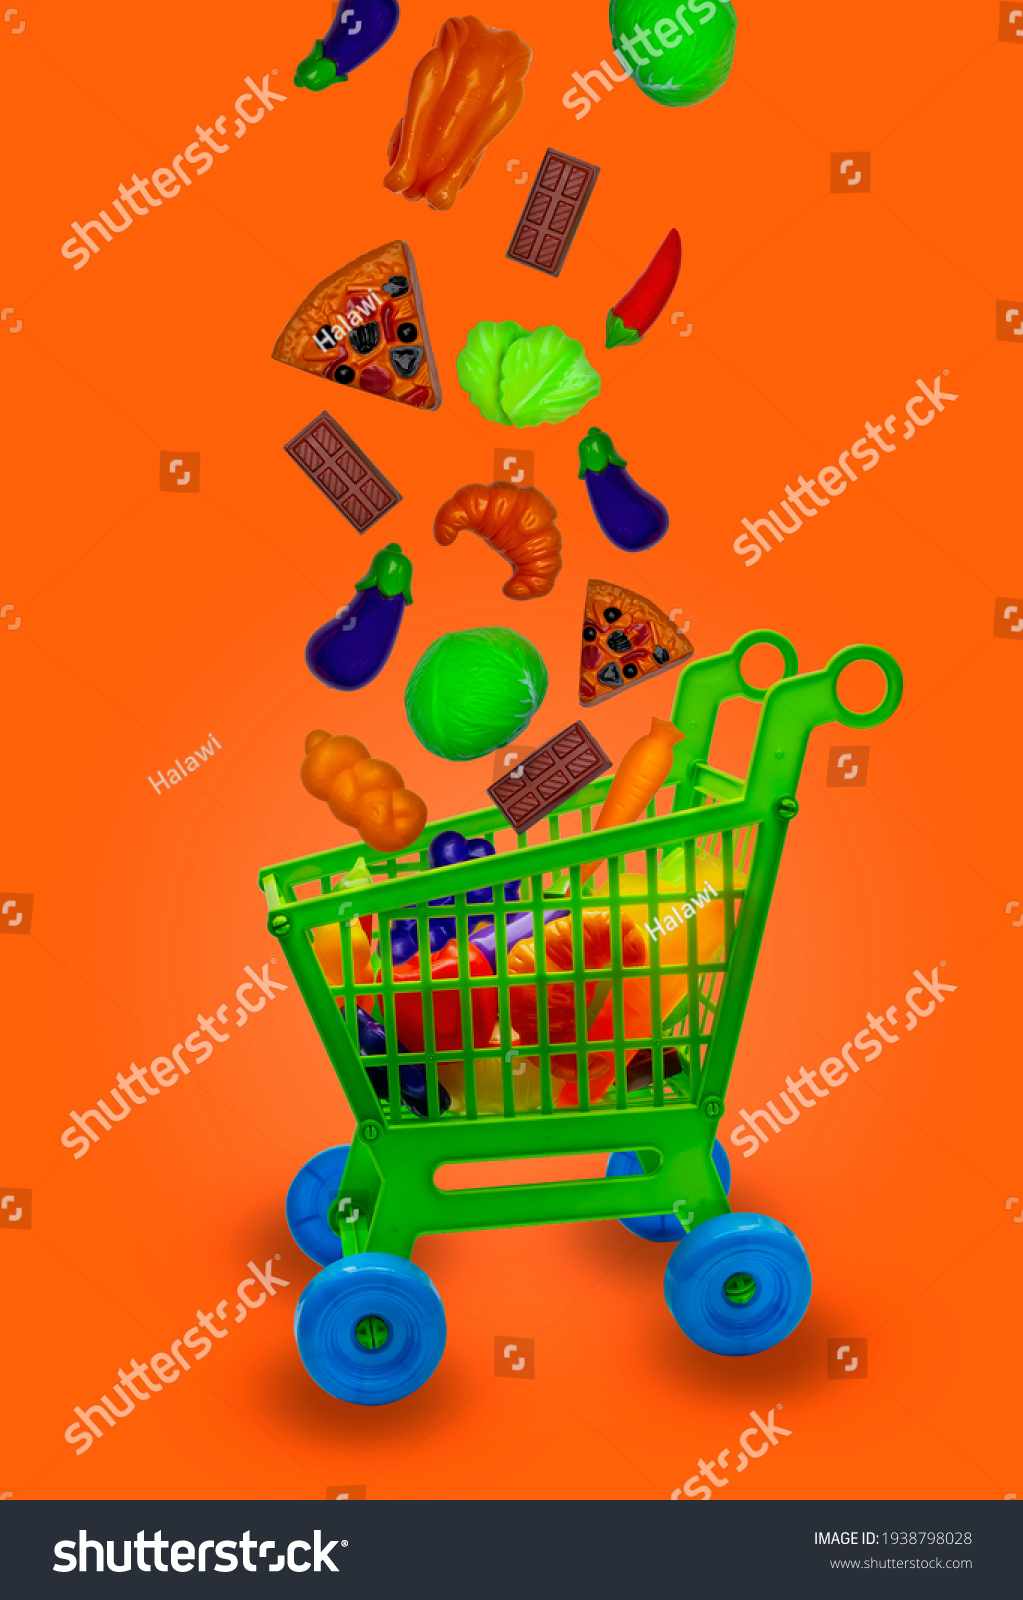 Toy Shopping cart with different toy food falling in den Shopping cart,Background color orange. #1938798028